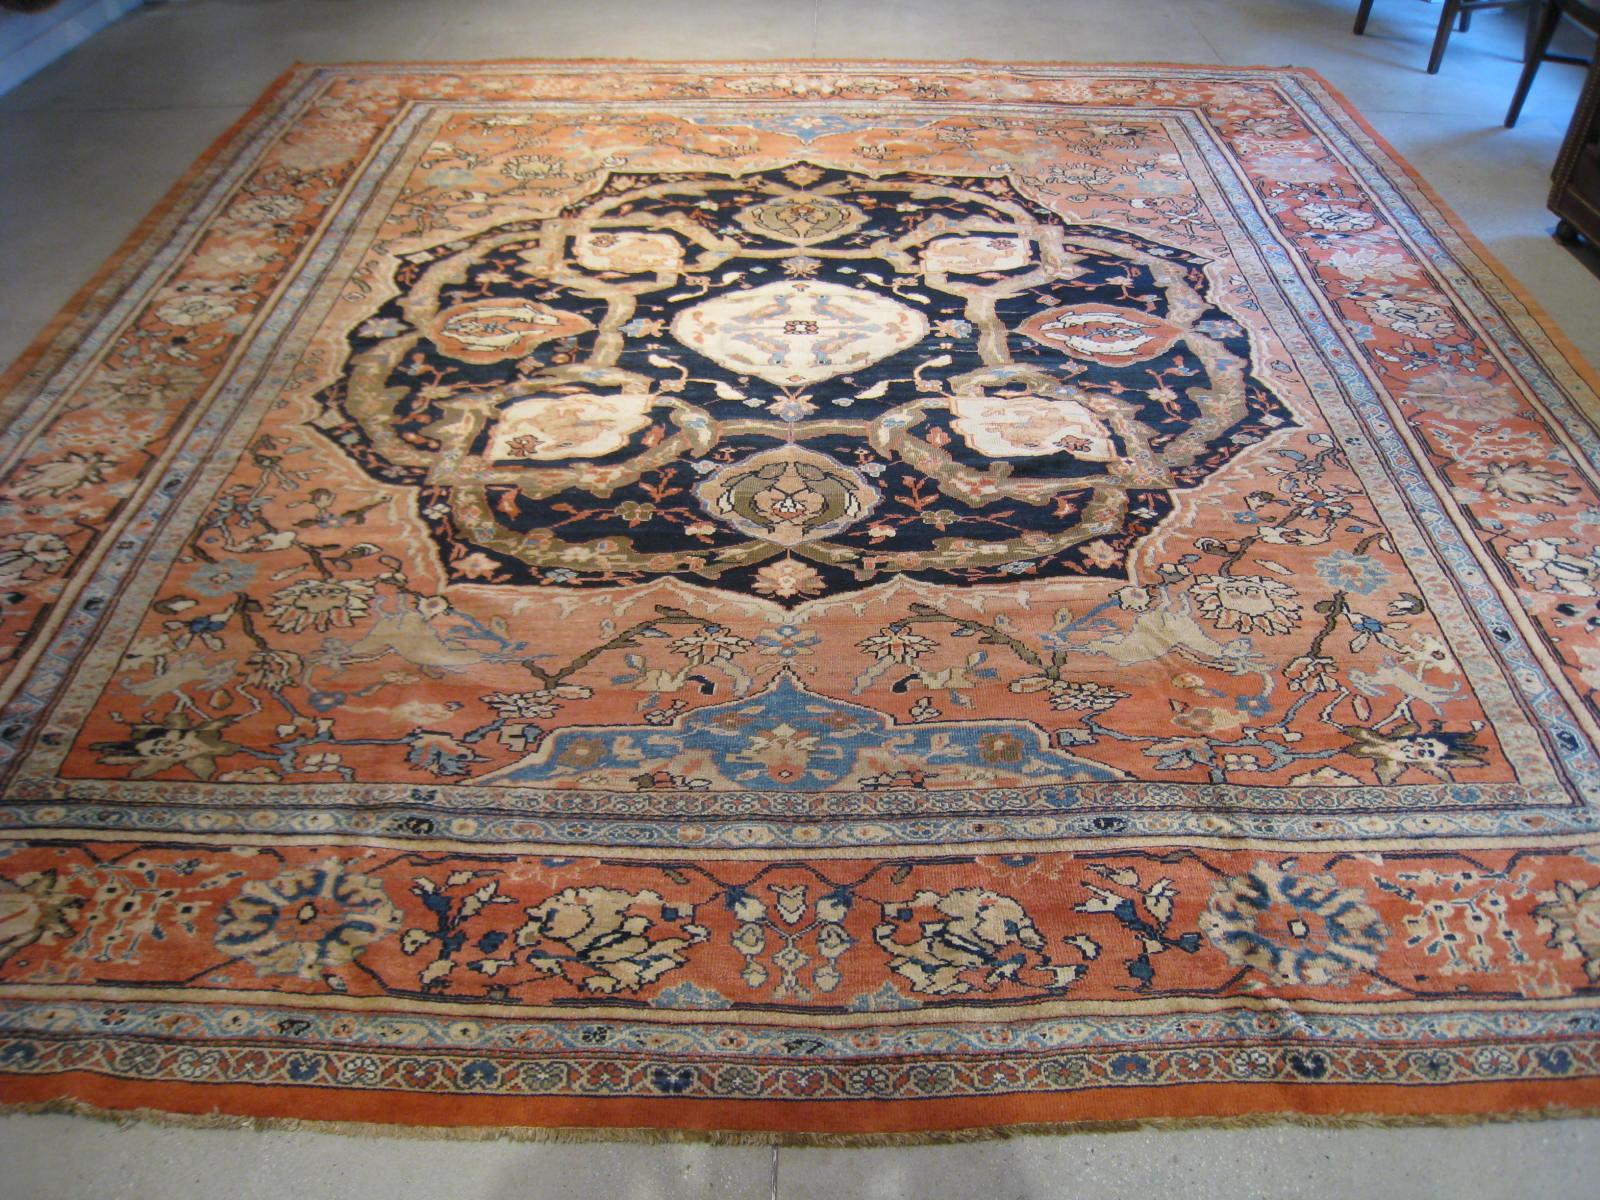 The Arak region in central Persia is generally accepted to have produced more large carpets than any other province in that country. During the second half of the nineteenth century, new carpet production commenced expressly for export to both